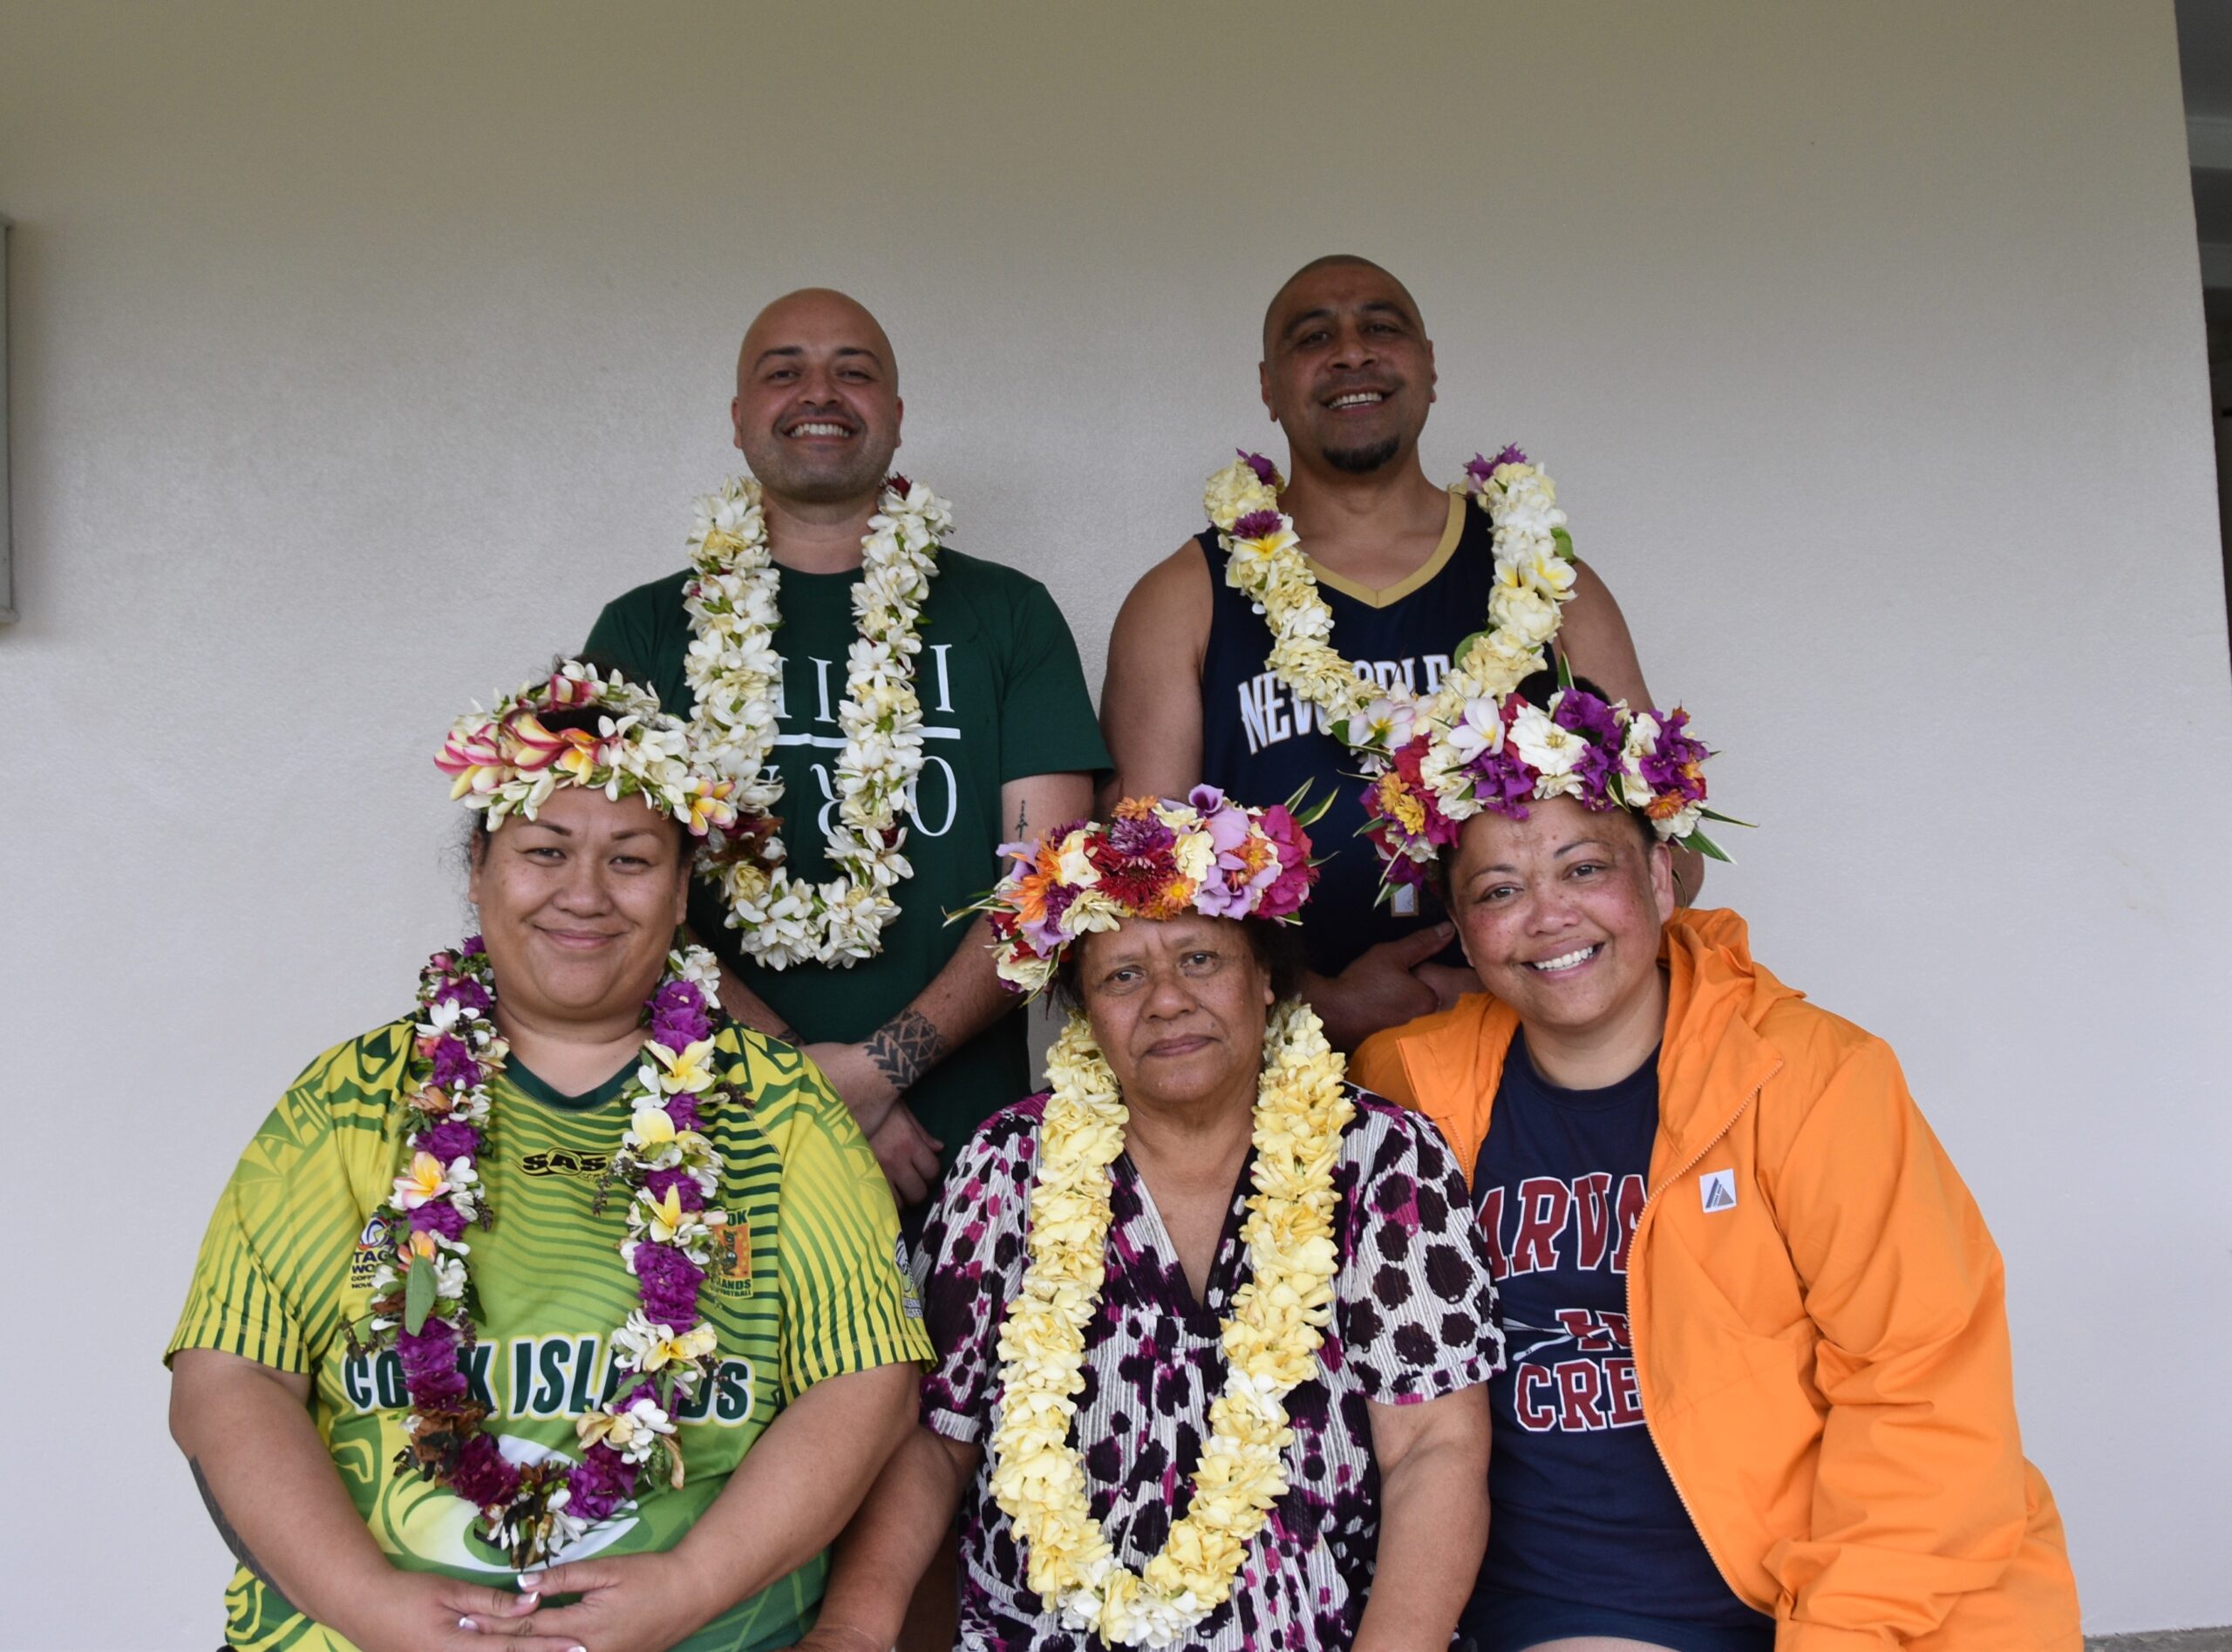 Mitiaro’s Te Maeva Nui NZ  performing arts team visits homeland for the first time